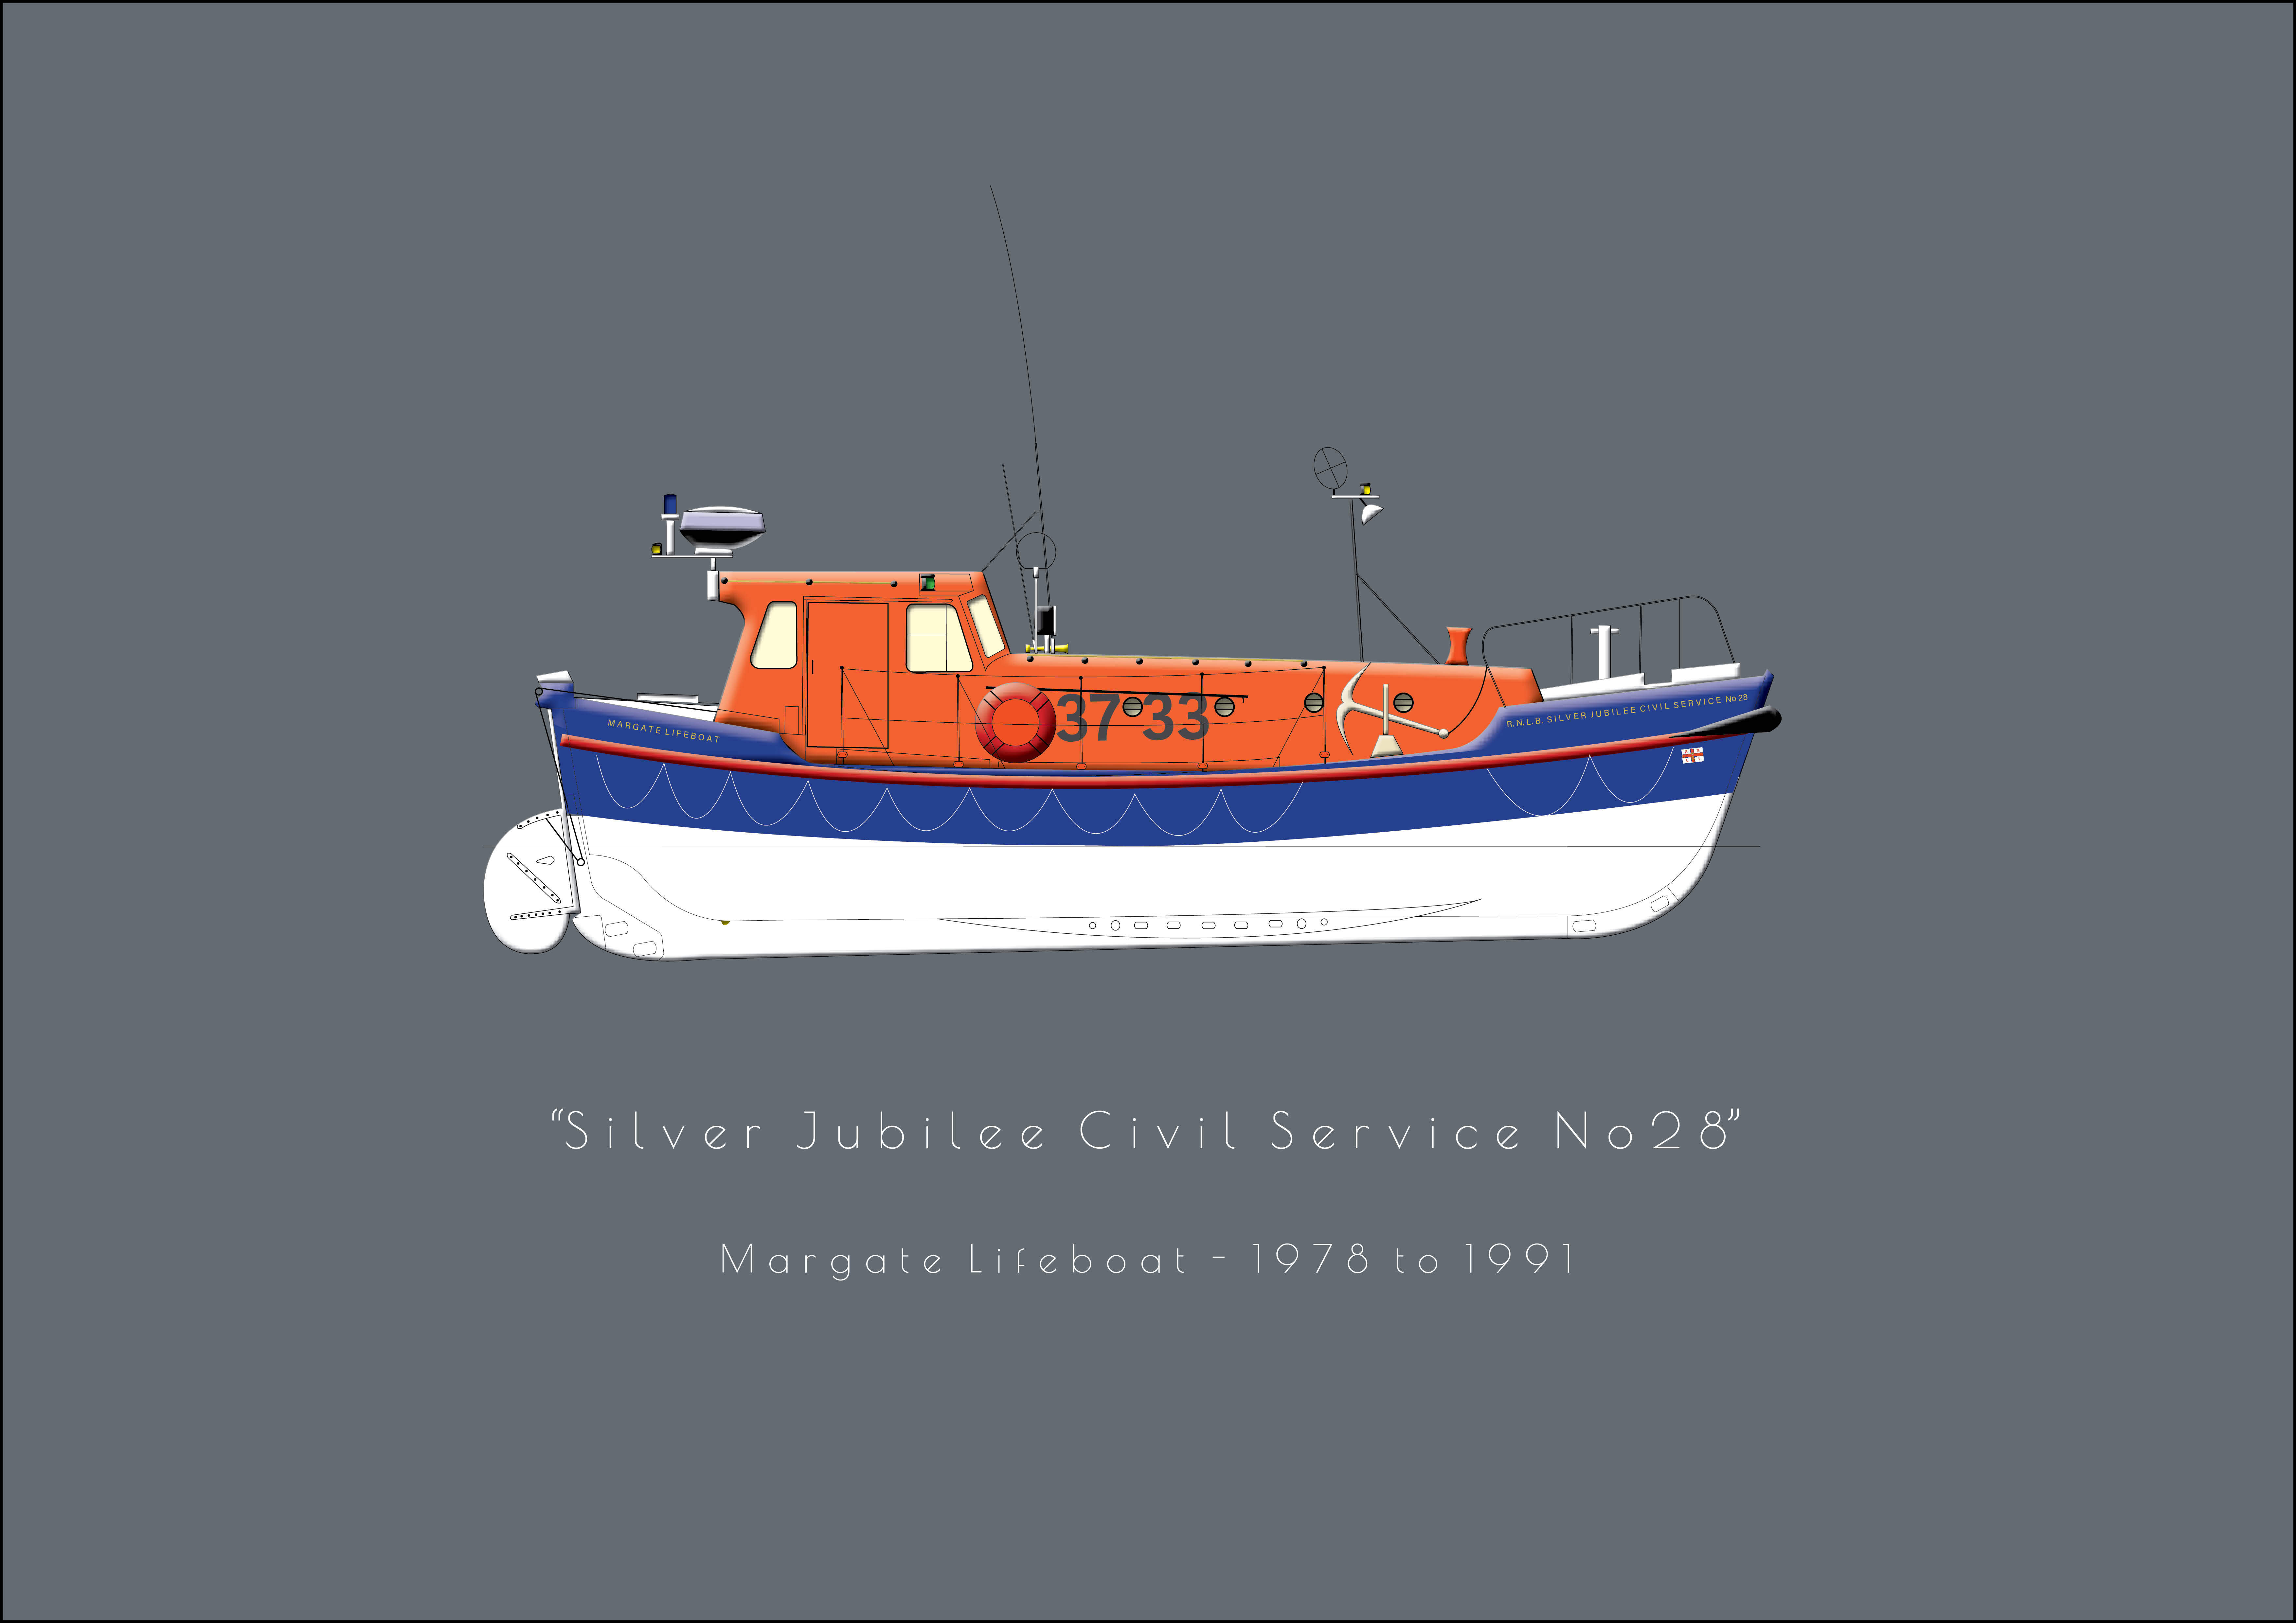 Vintage Lifeboat illustrations - A4 Giclee print